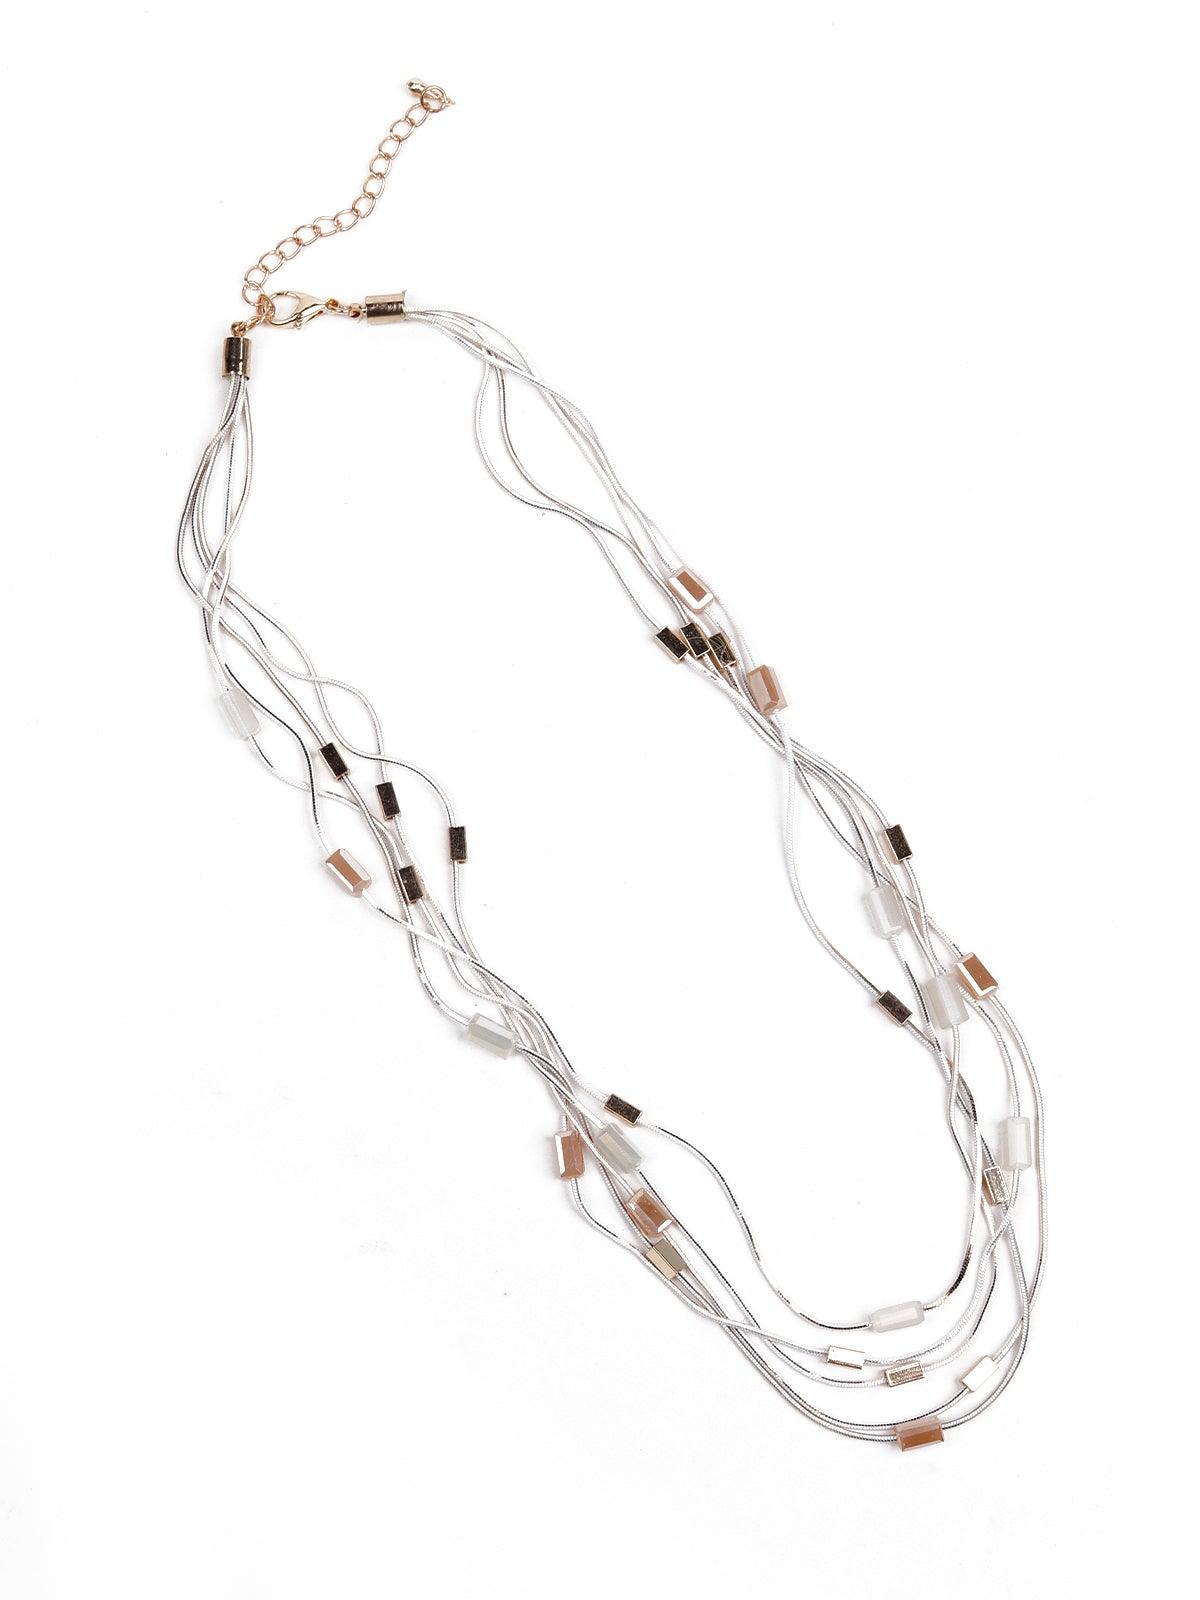 Women's Whimsical Silver Multilayered Necklace - Odette